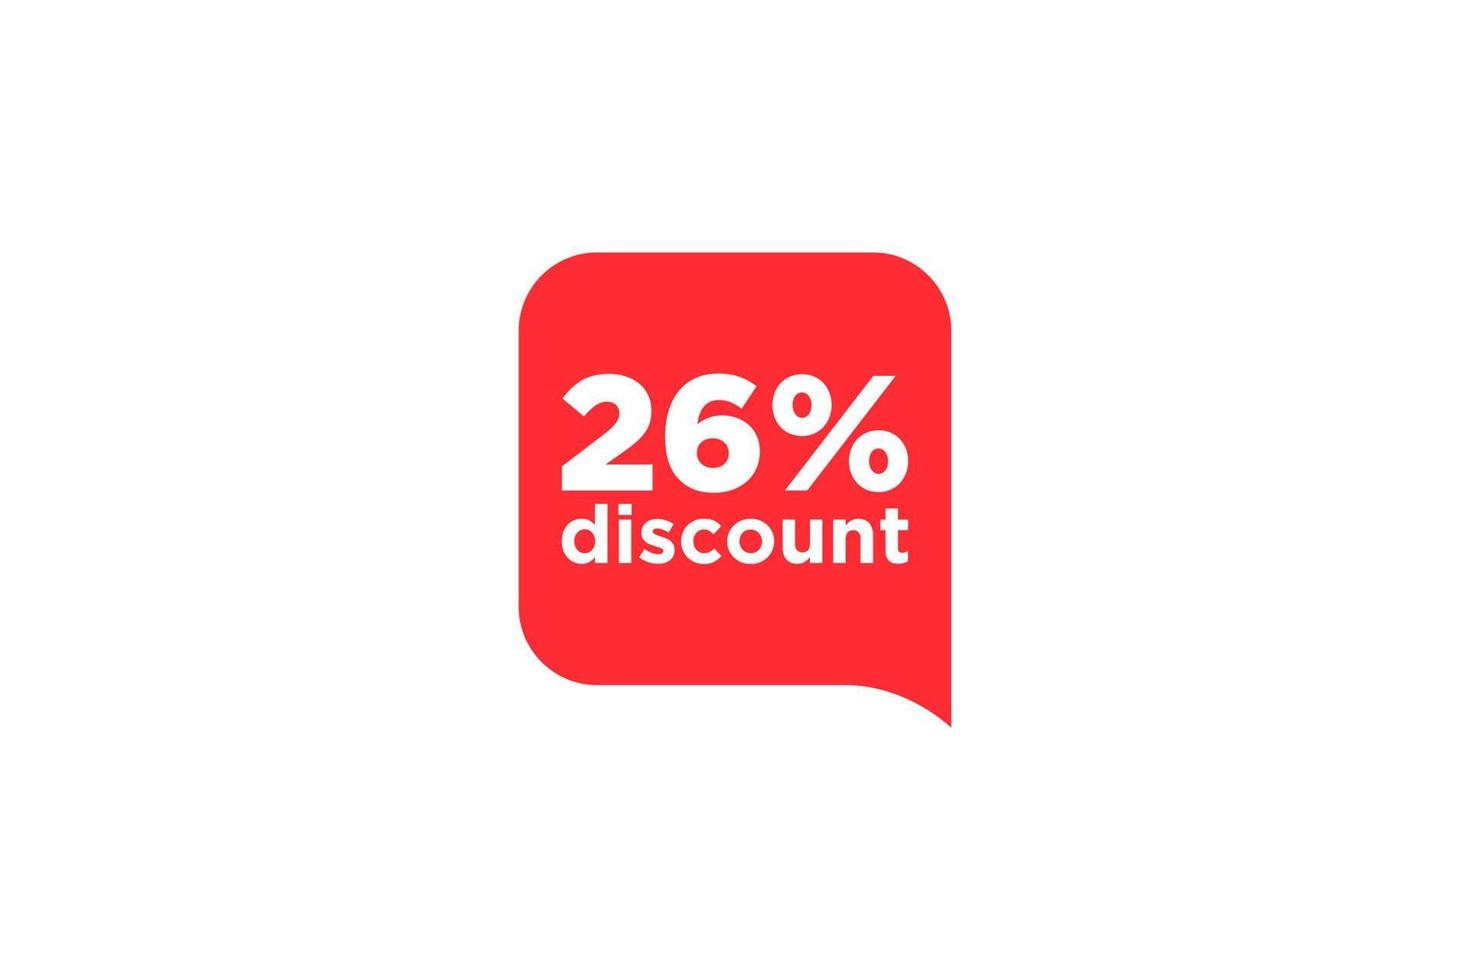 26 discount, Sales Vector badges for Labels, , Stickers, Banners, Tags, Web Stickers, New offer. Discount origami sign banner.